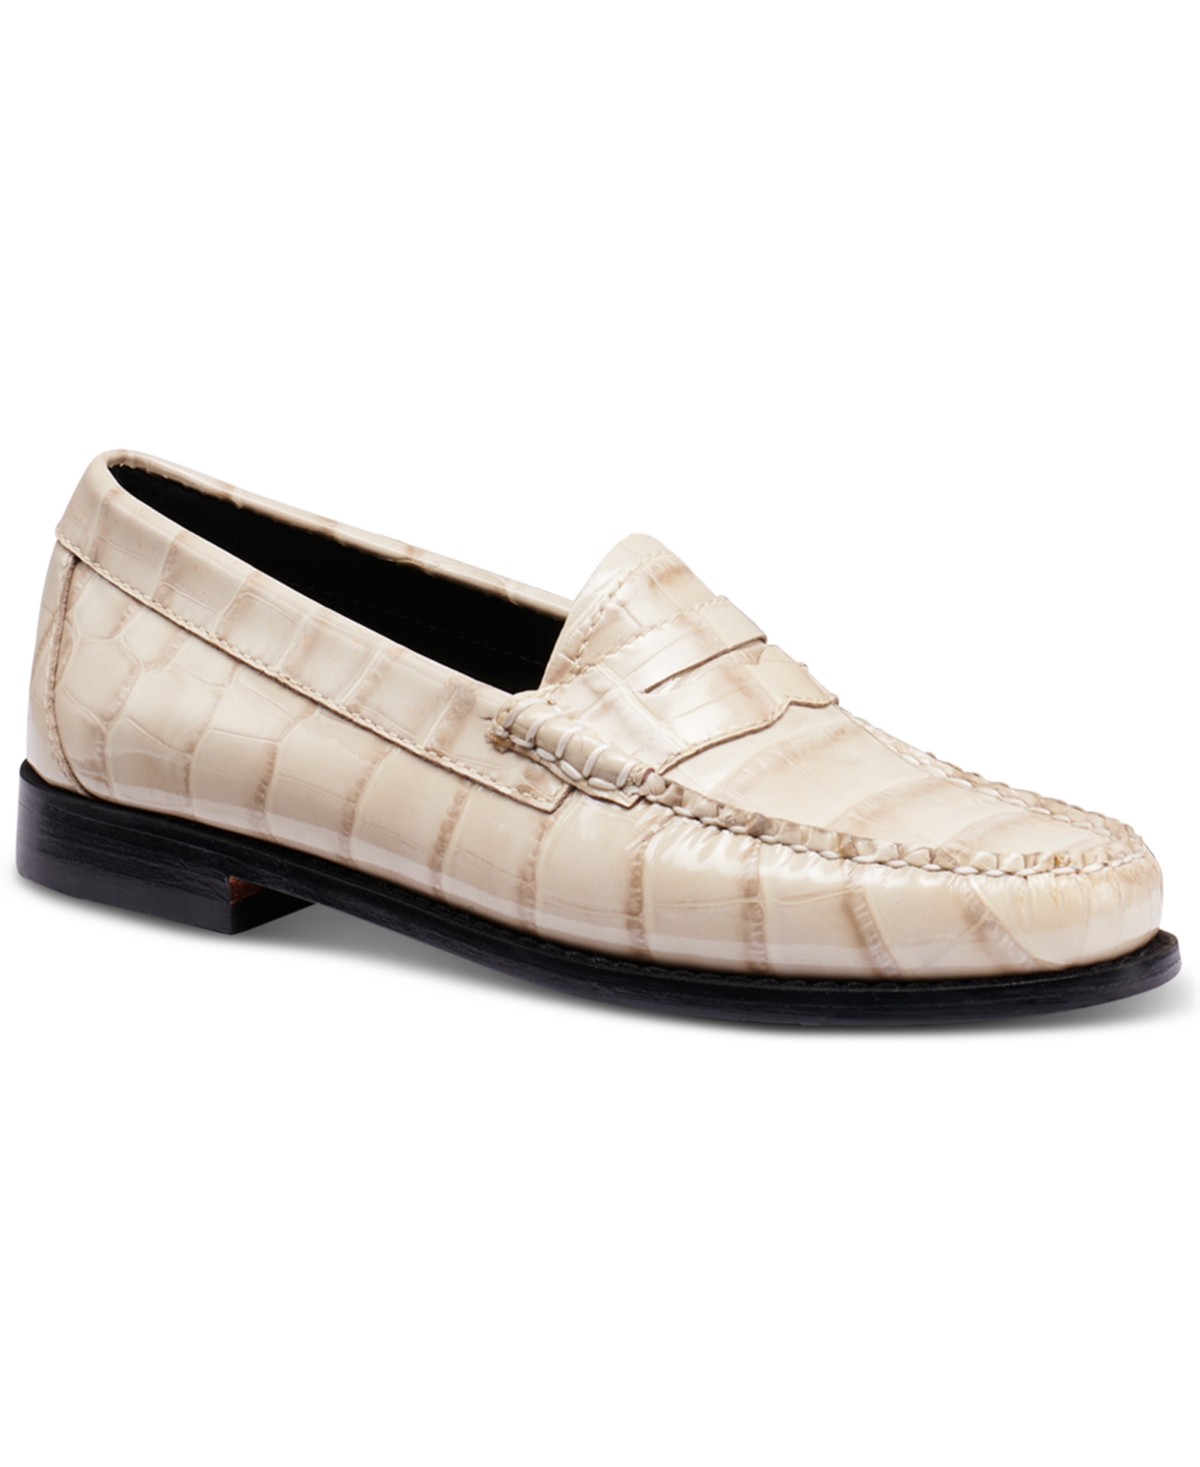 G.h.bass Women's Whitney Croco Weejuns Loafer Flats - Cloud